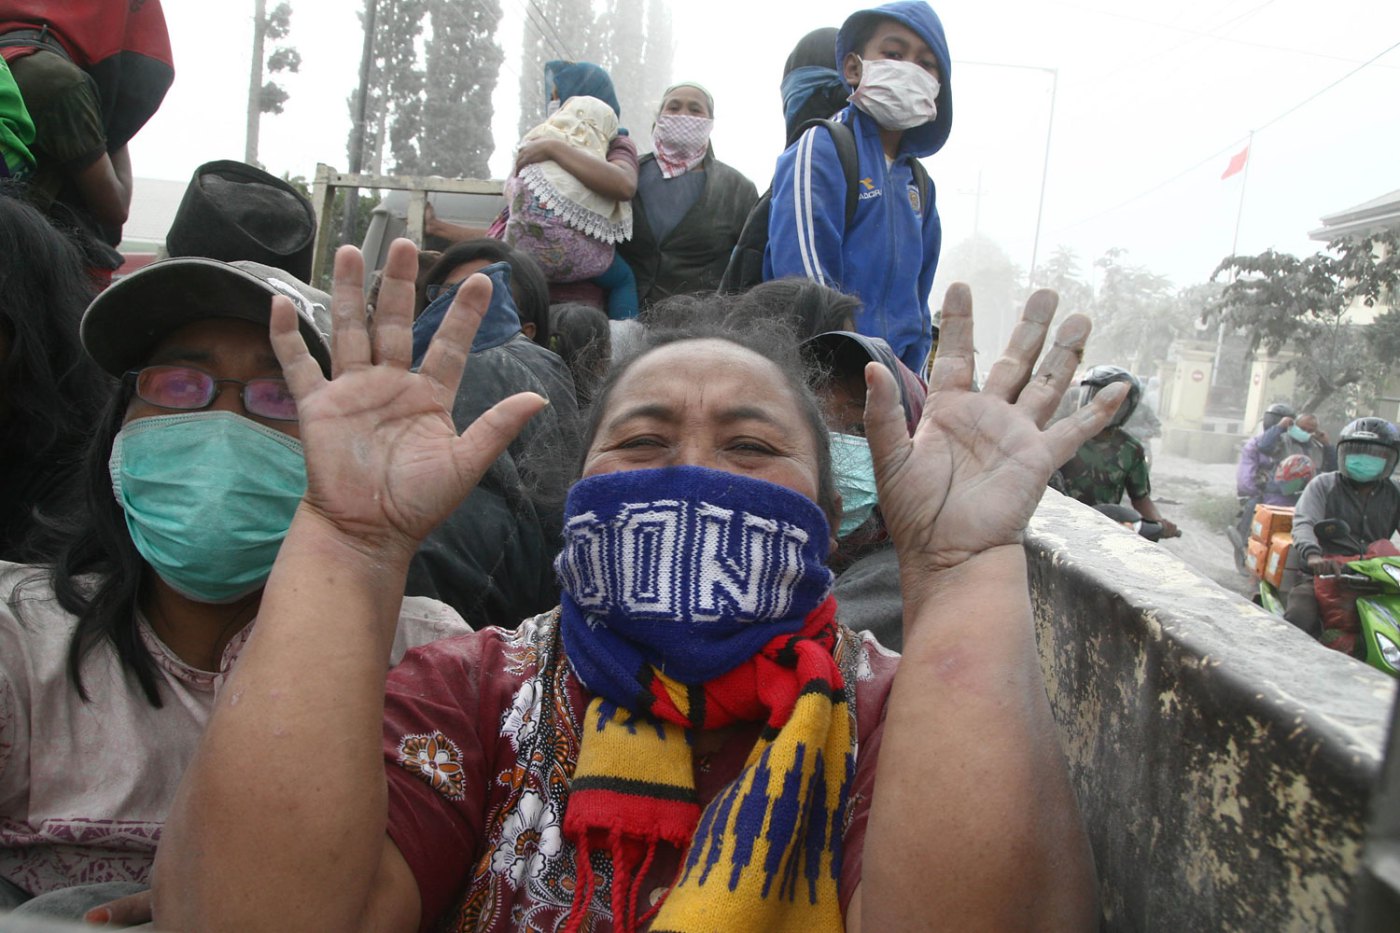 A woman gestures during the evacuation in Malang, East Java province, on Feb. 14, 2014 moments after Mount Kelud's eruption.